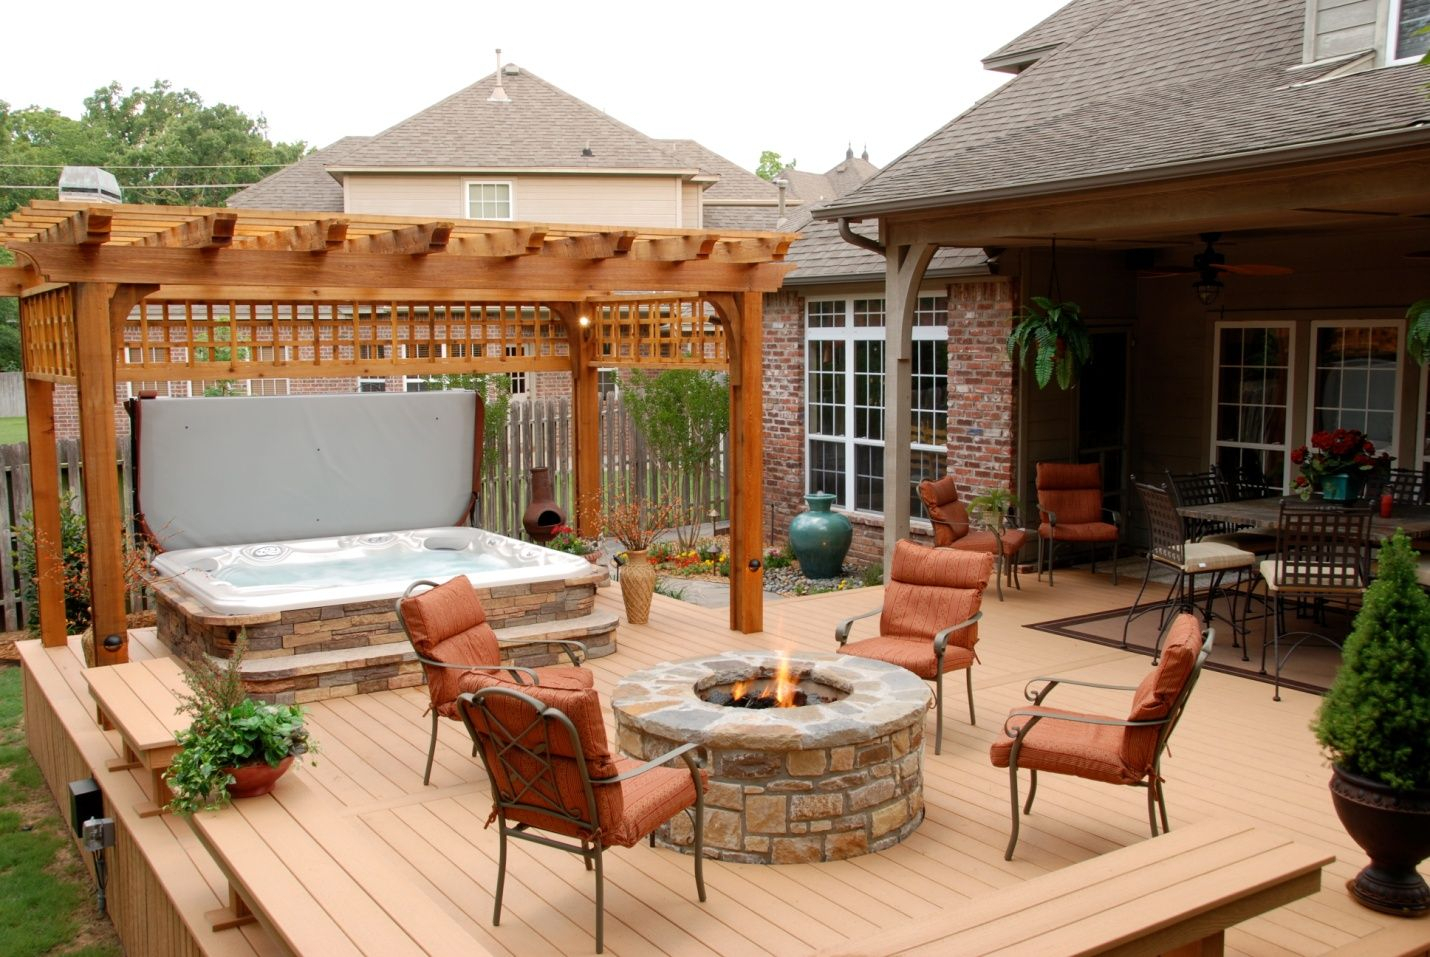 Deck Designs With Hot Tub And Fire Pit Decks Ideas pertaining to dimensions 1430 X 957